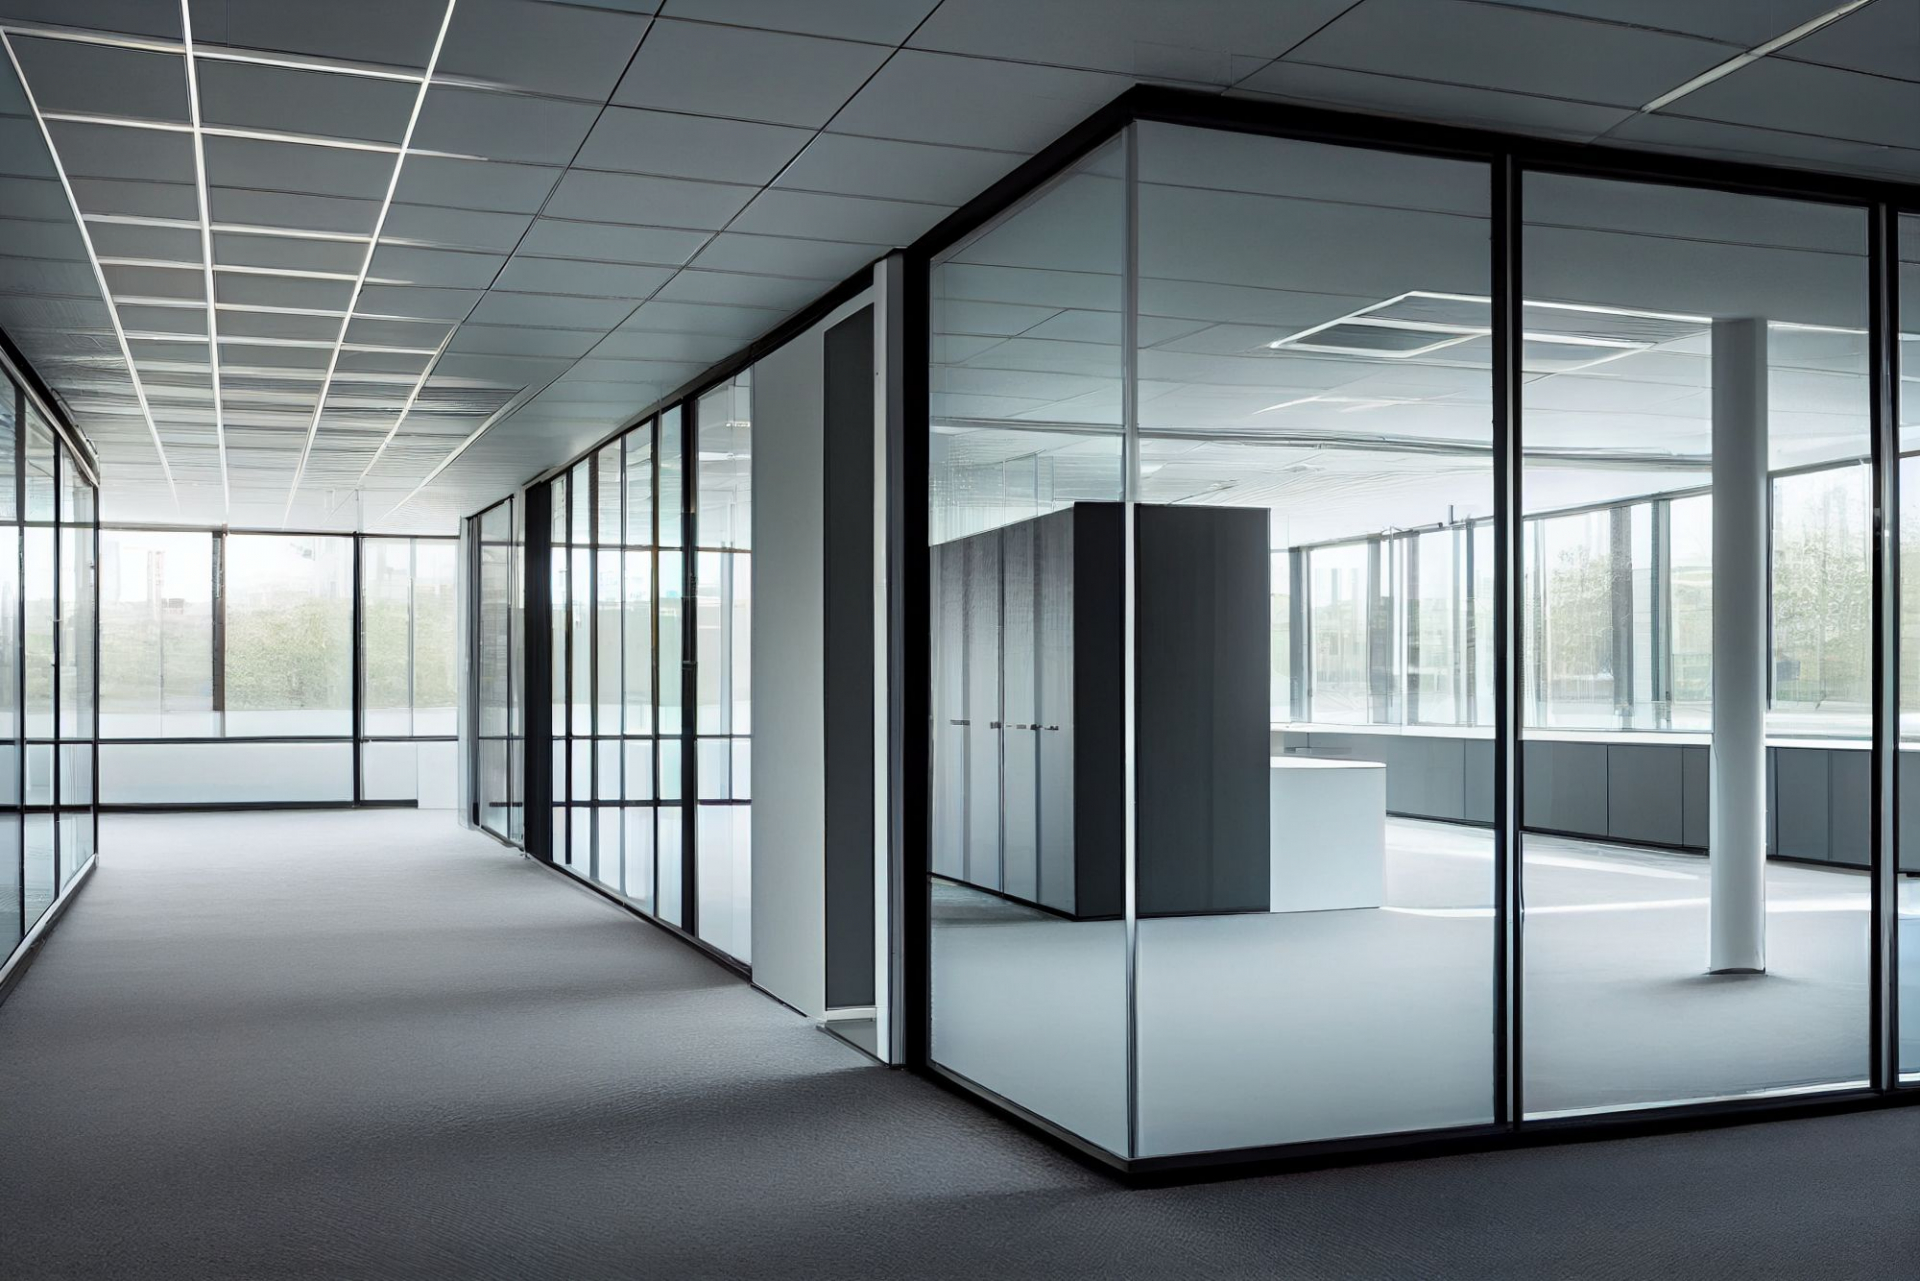 Demountable Paritions and Office space with glass wall partitions